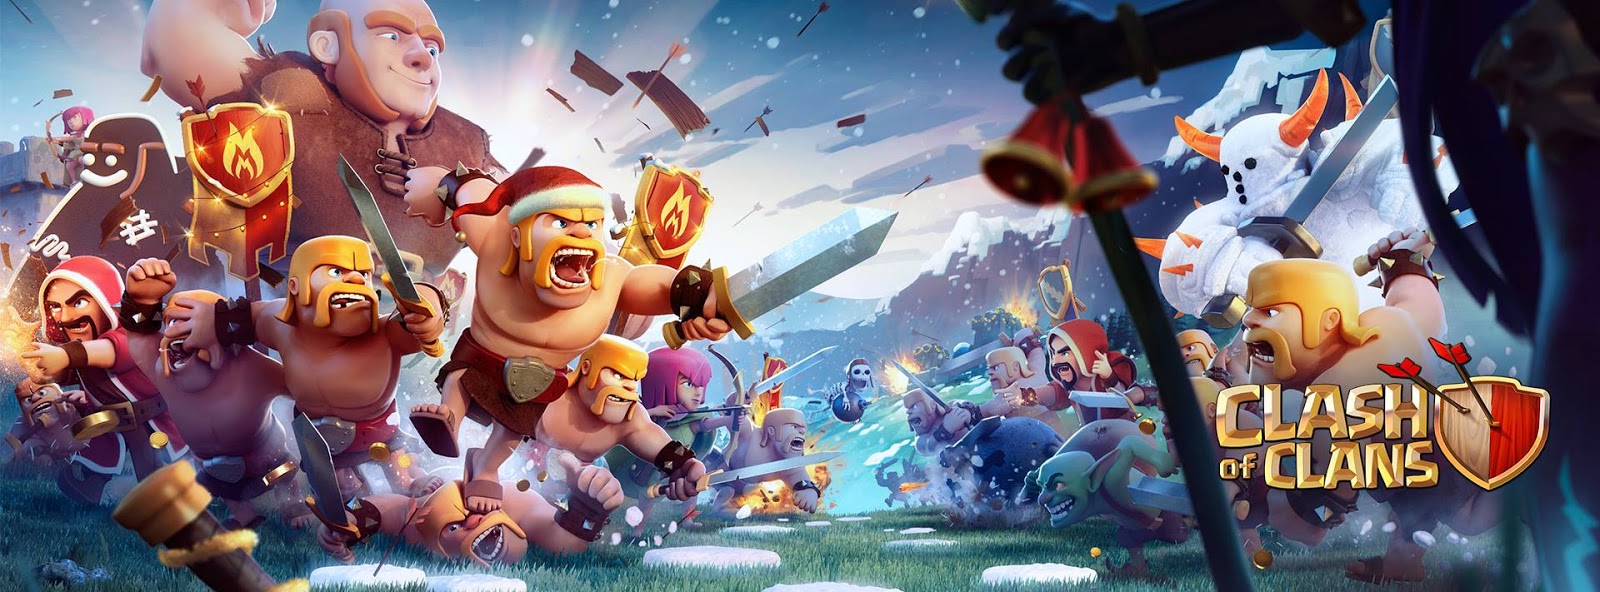 Best Clash of clans iPhone HD Wallpapers iLikeWallpaper